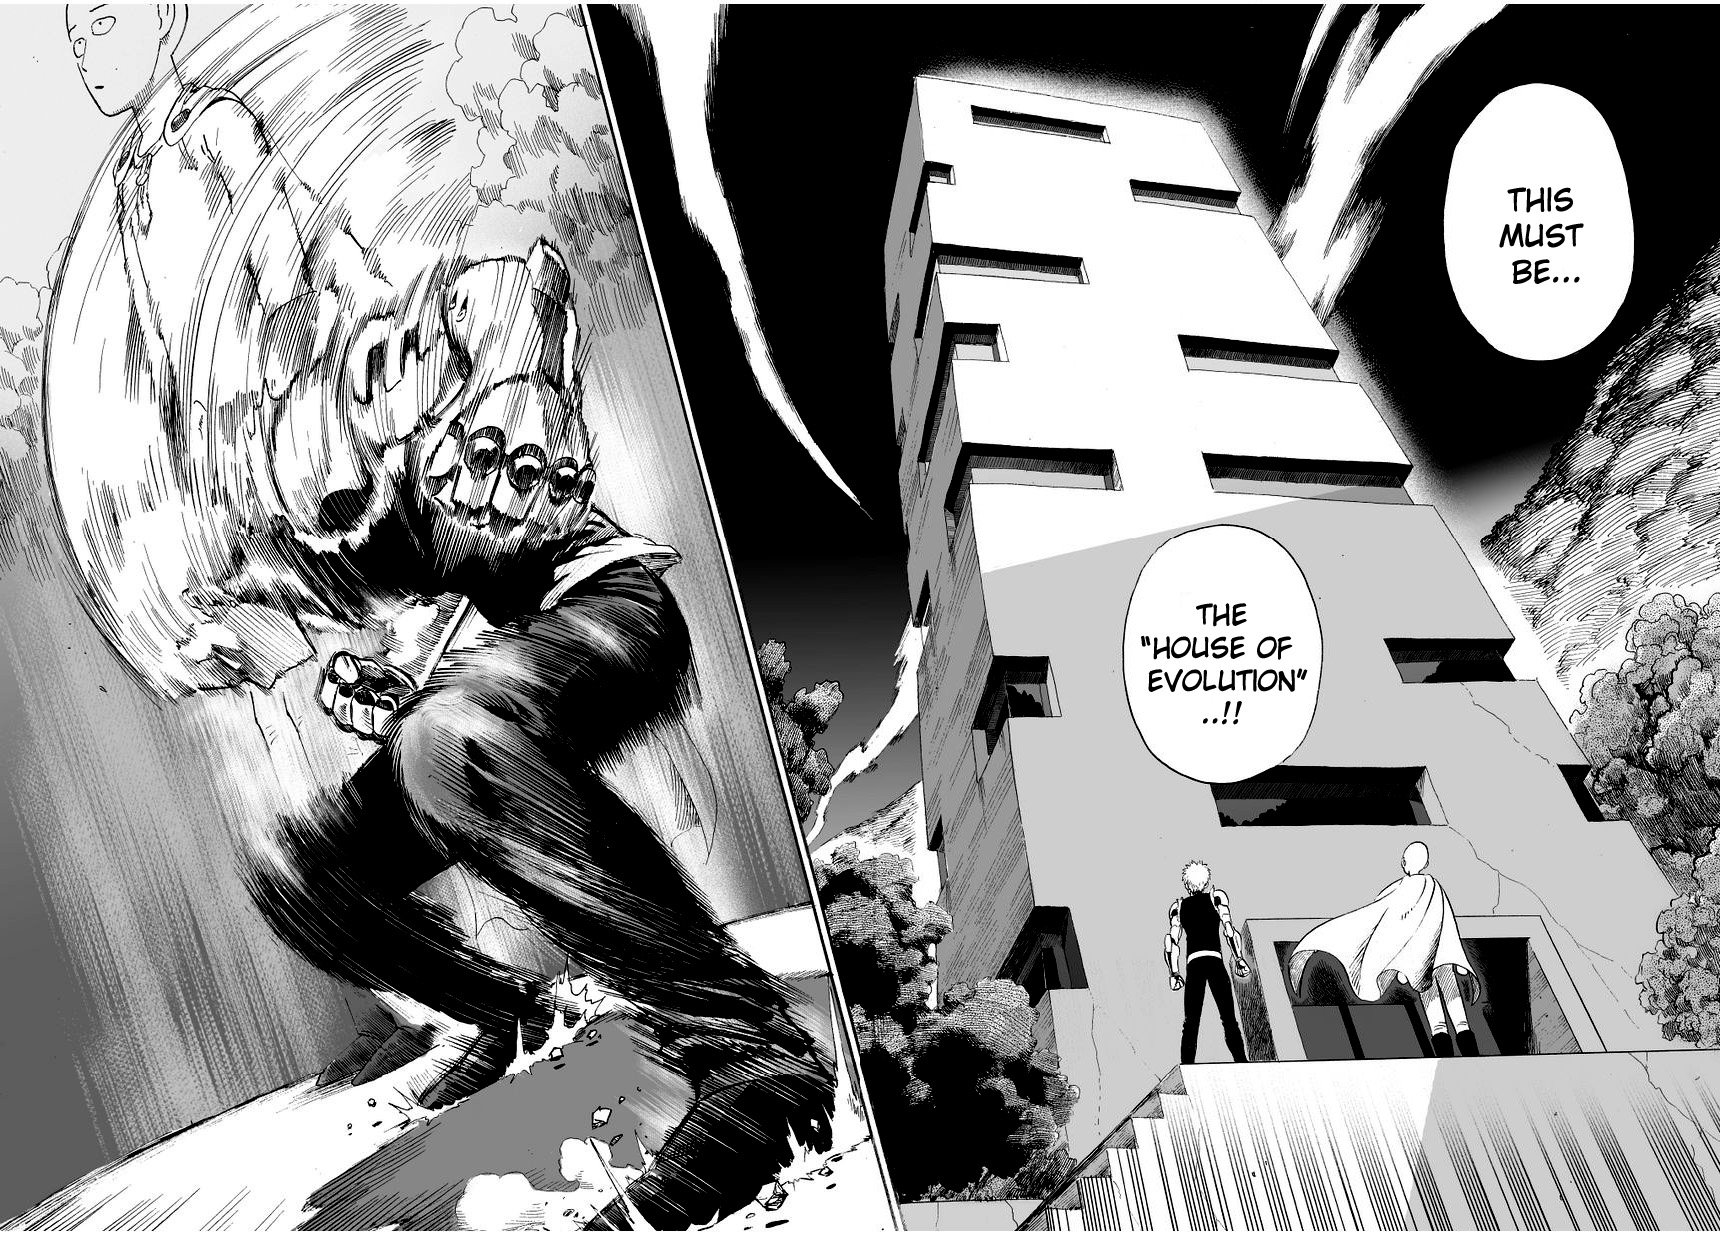 One Punch Man, Chapter 9 - House of Evolution image 24